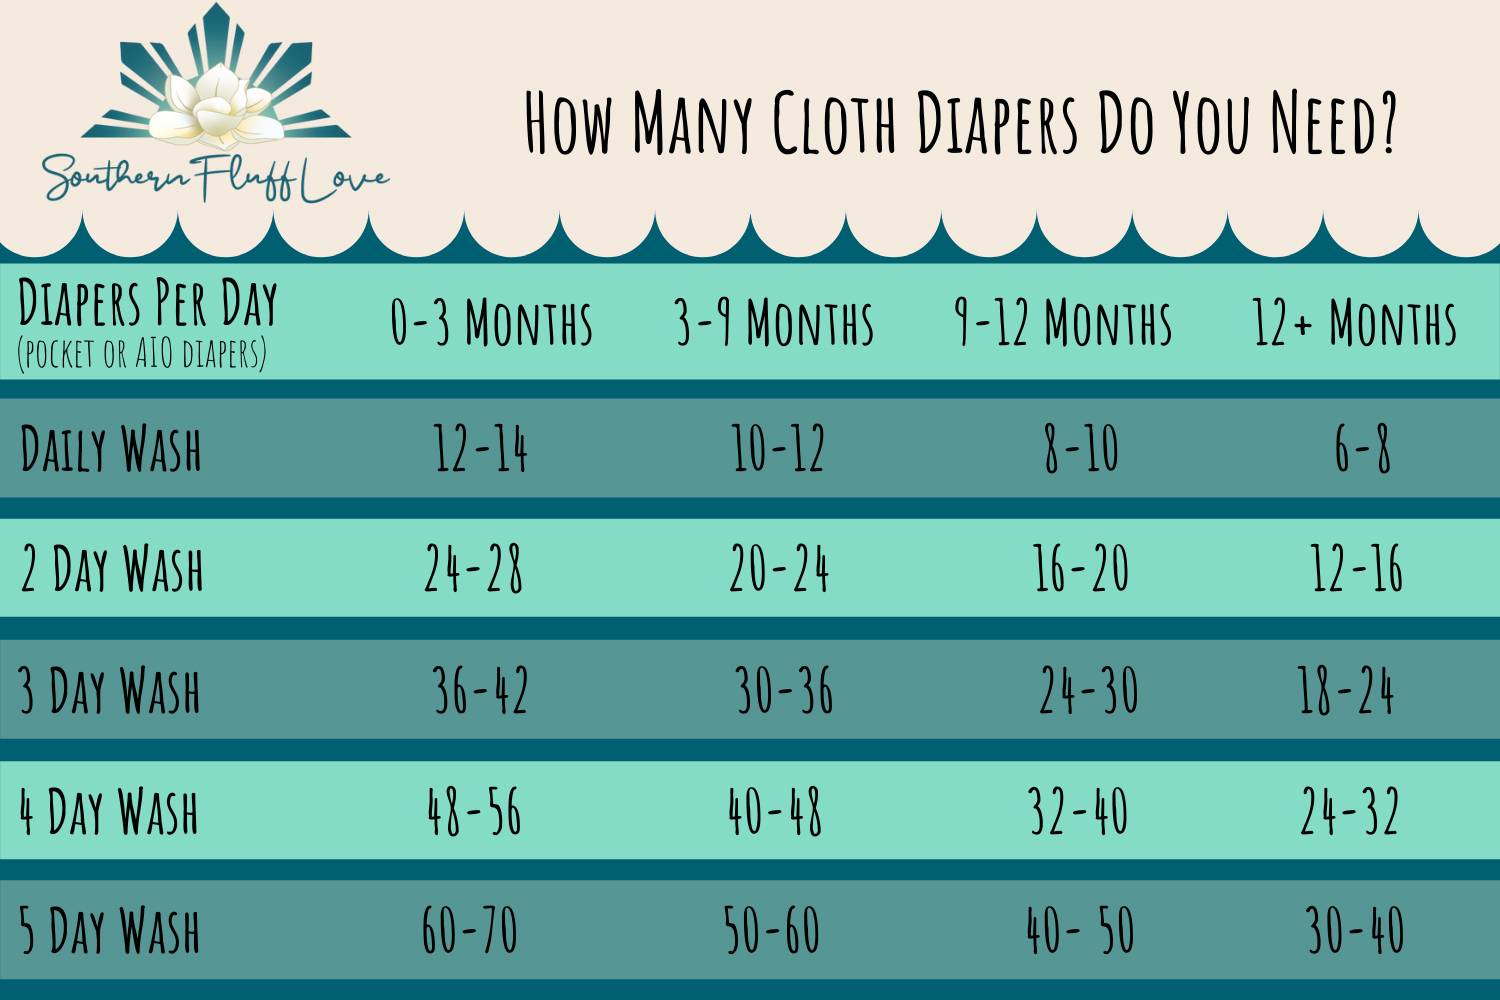 Diapers Needed Per Day